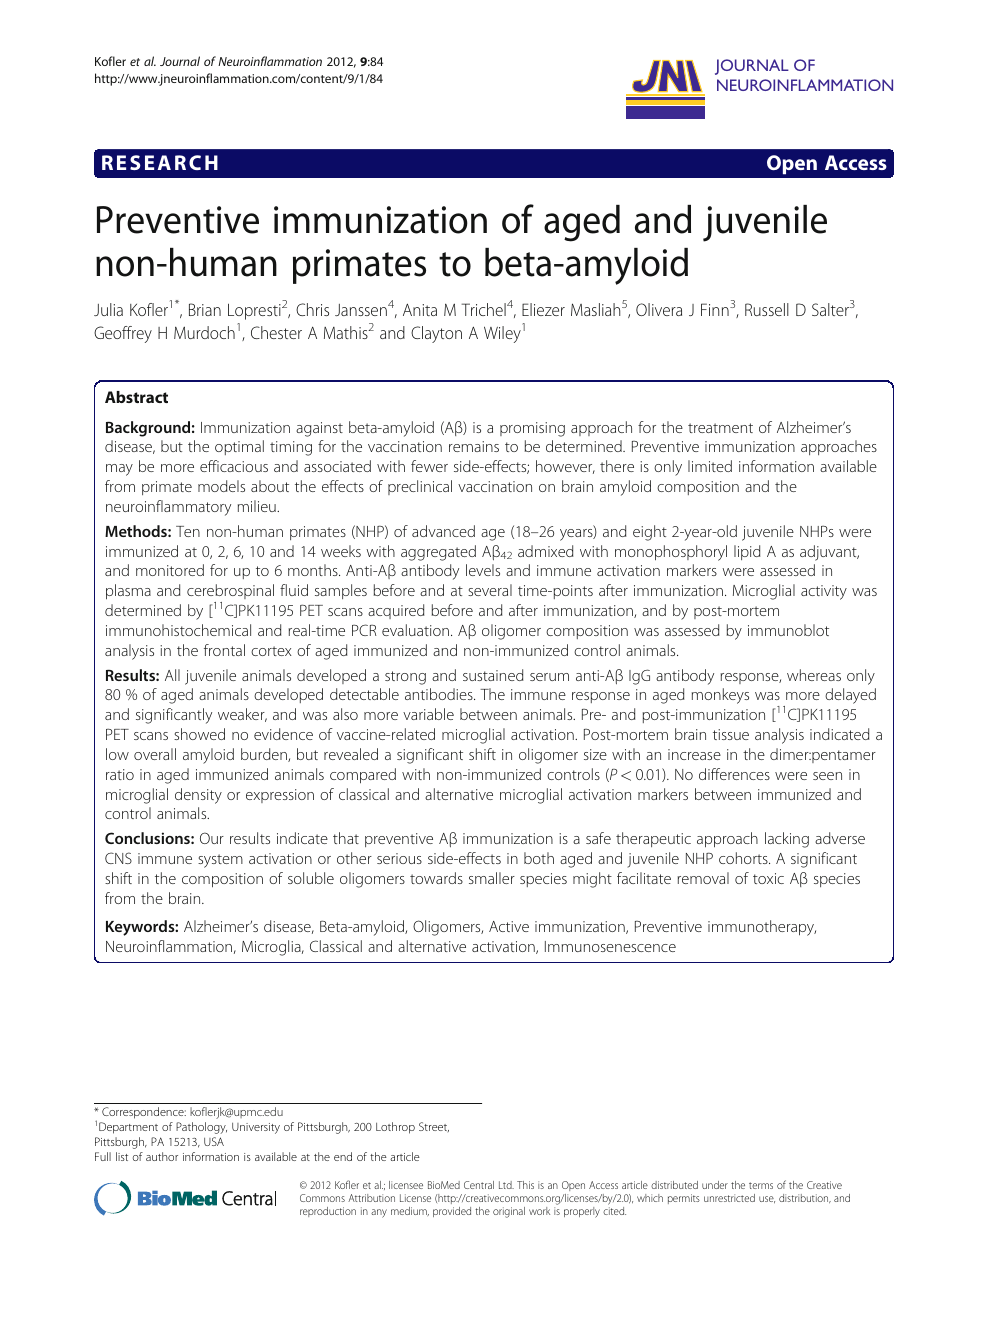 Preventive Immunization Of Aged And Juvenile Non Human Primates To Beta Amyloid Topic Of Research Paper In Veterinary Science Download Scholarly Article Pdf And Read For Free On Cyberleninka Open Science Hub